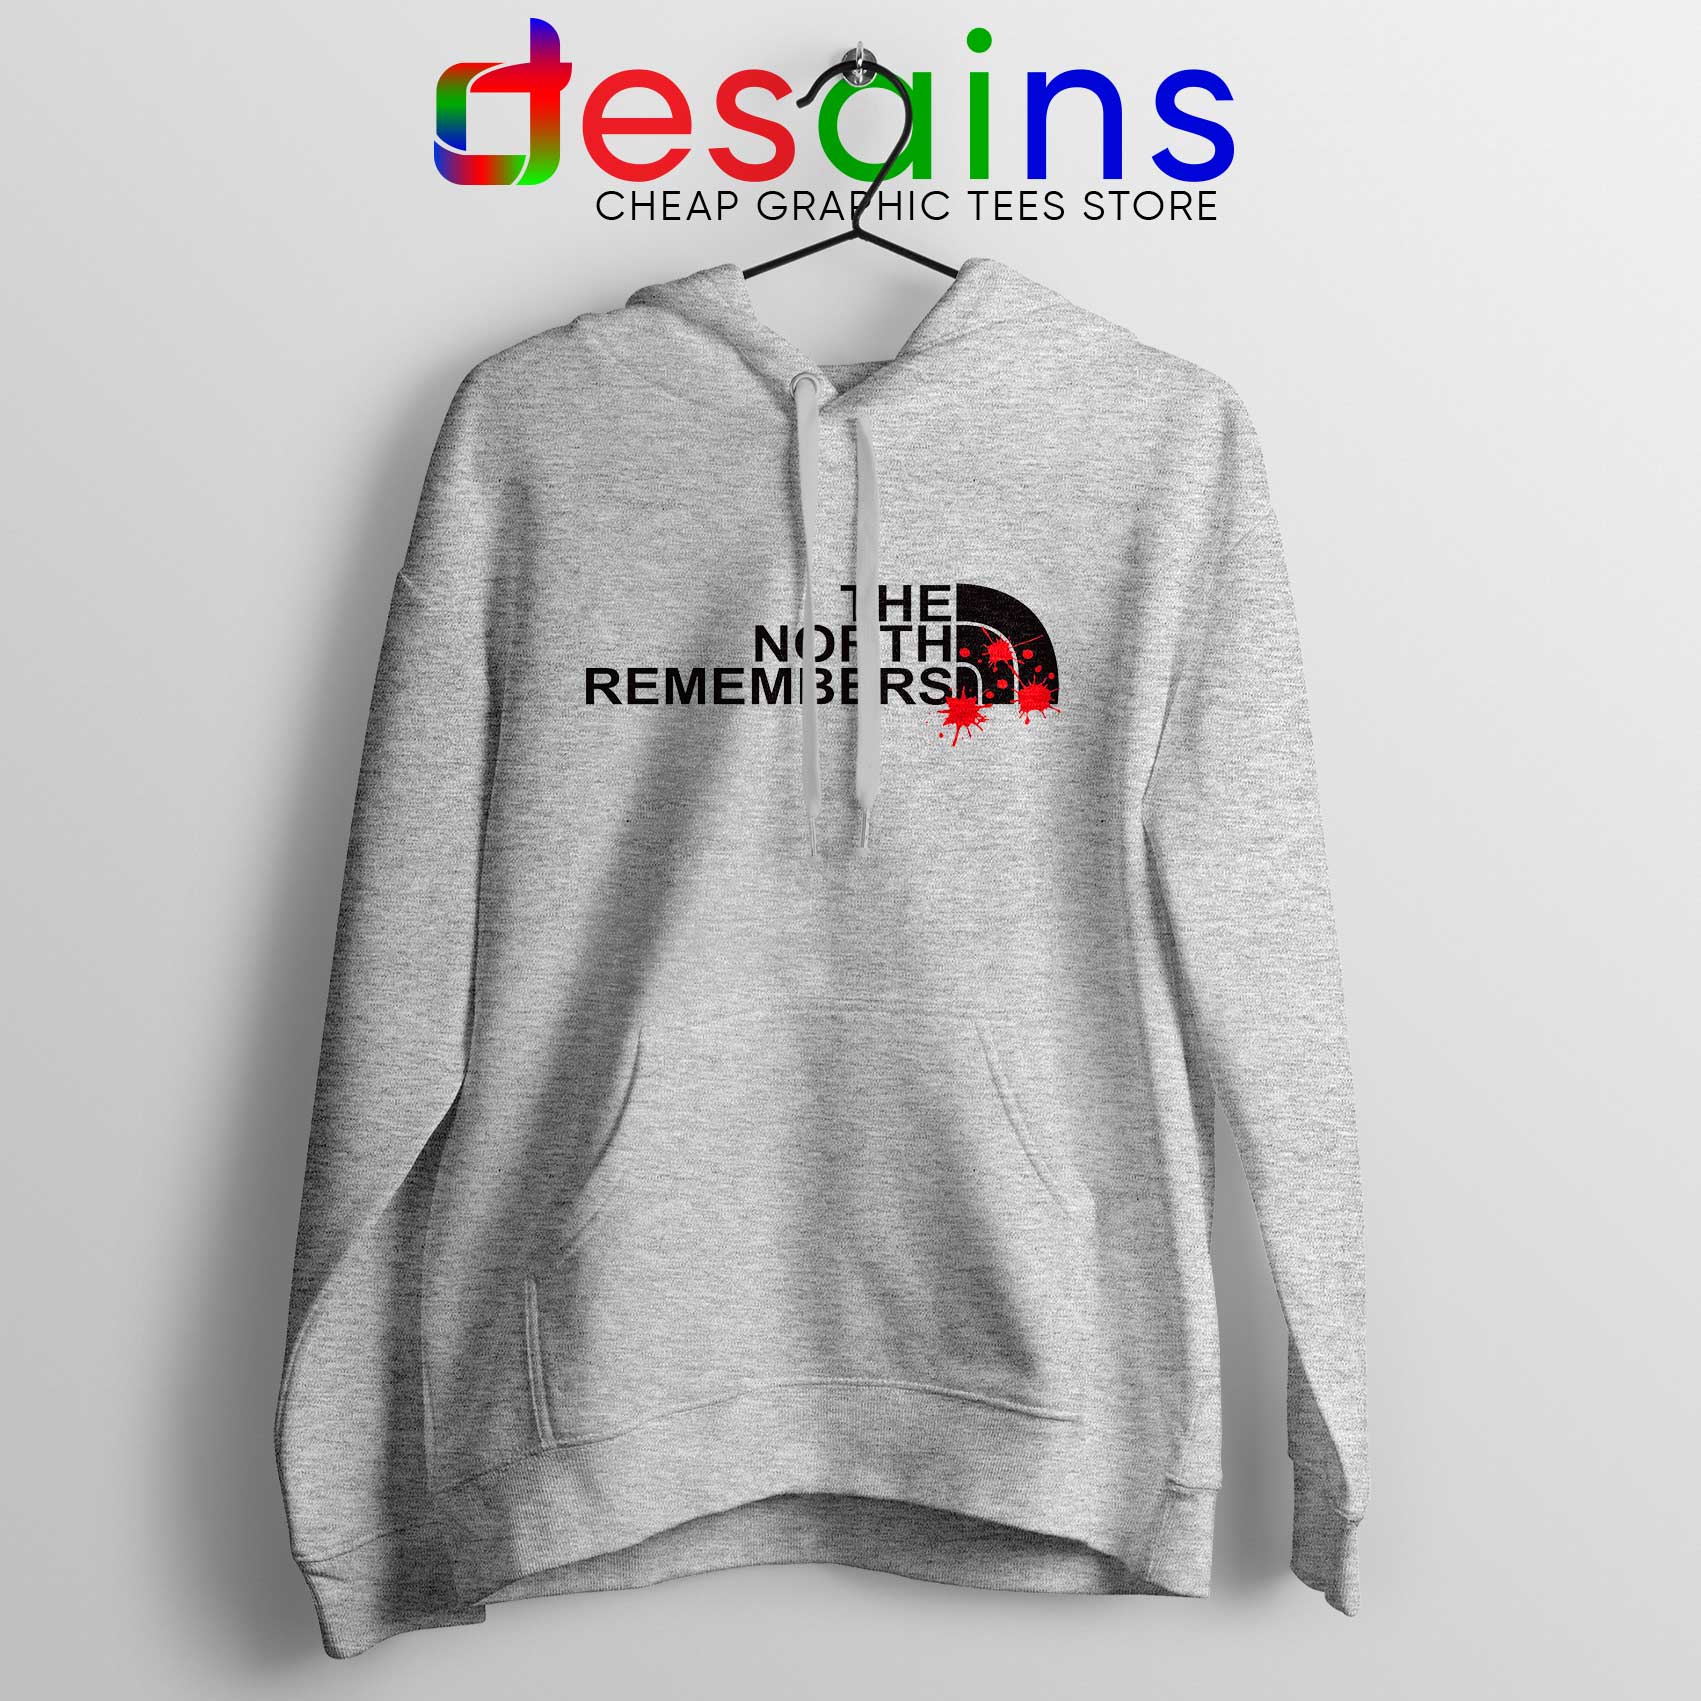 the north remembers hoodie